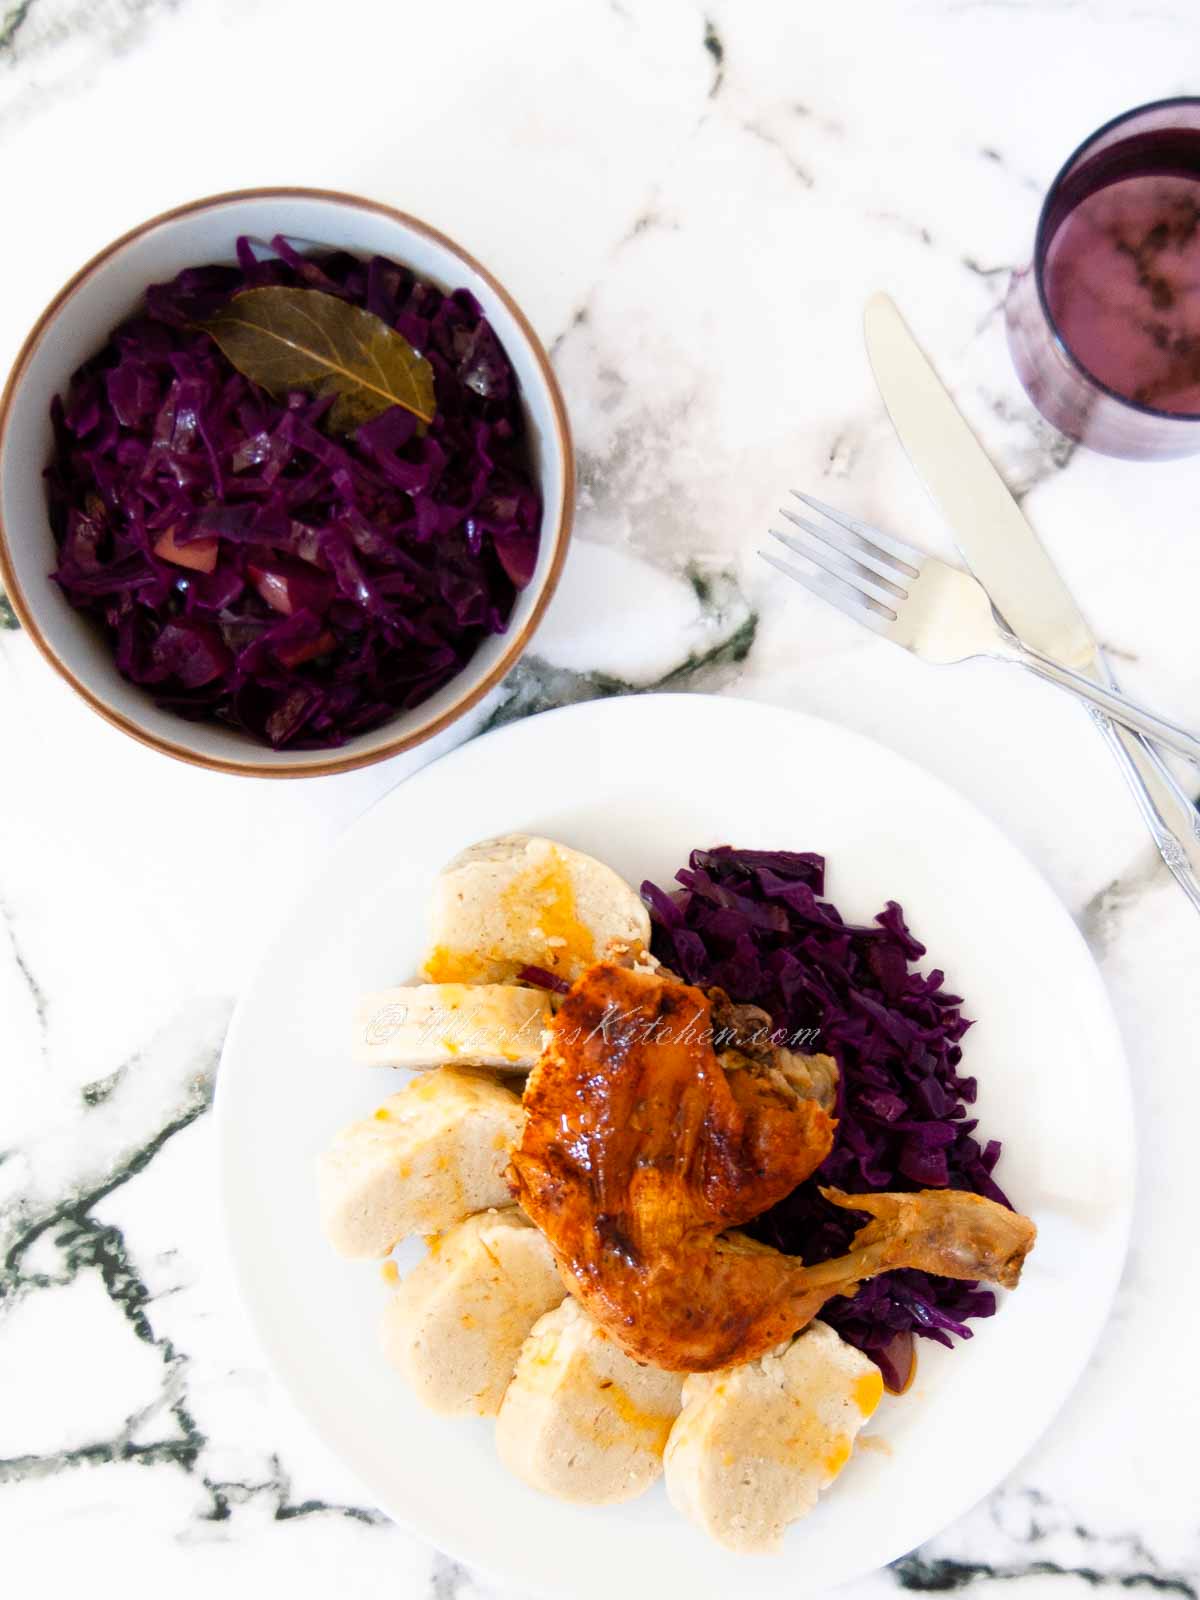 A top-down photo of a table spread with a bowl of red cabbage, and a plate of roast dinner with a roast chicken leg, braised red cabbage and dumplings.